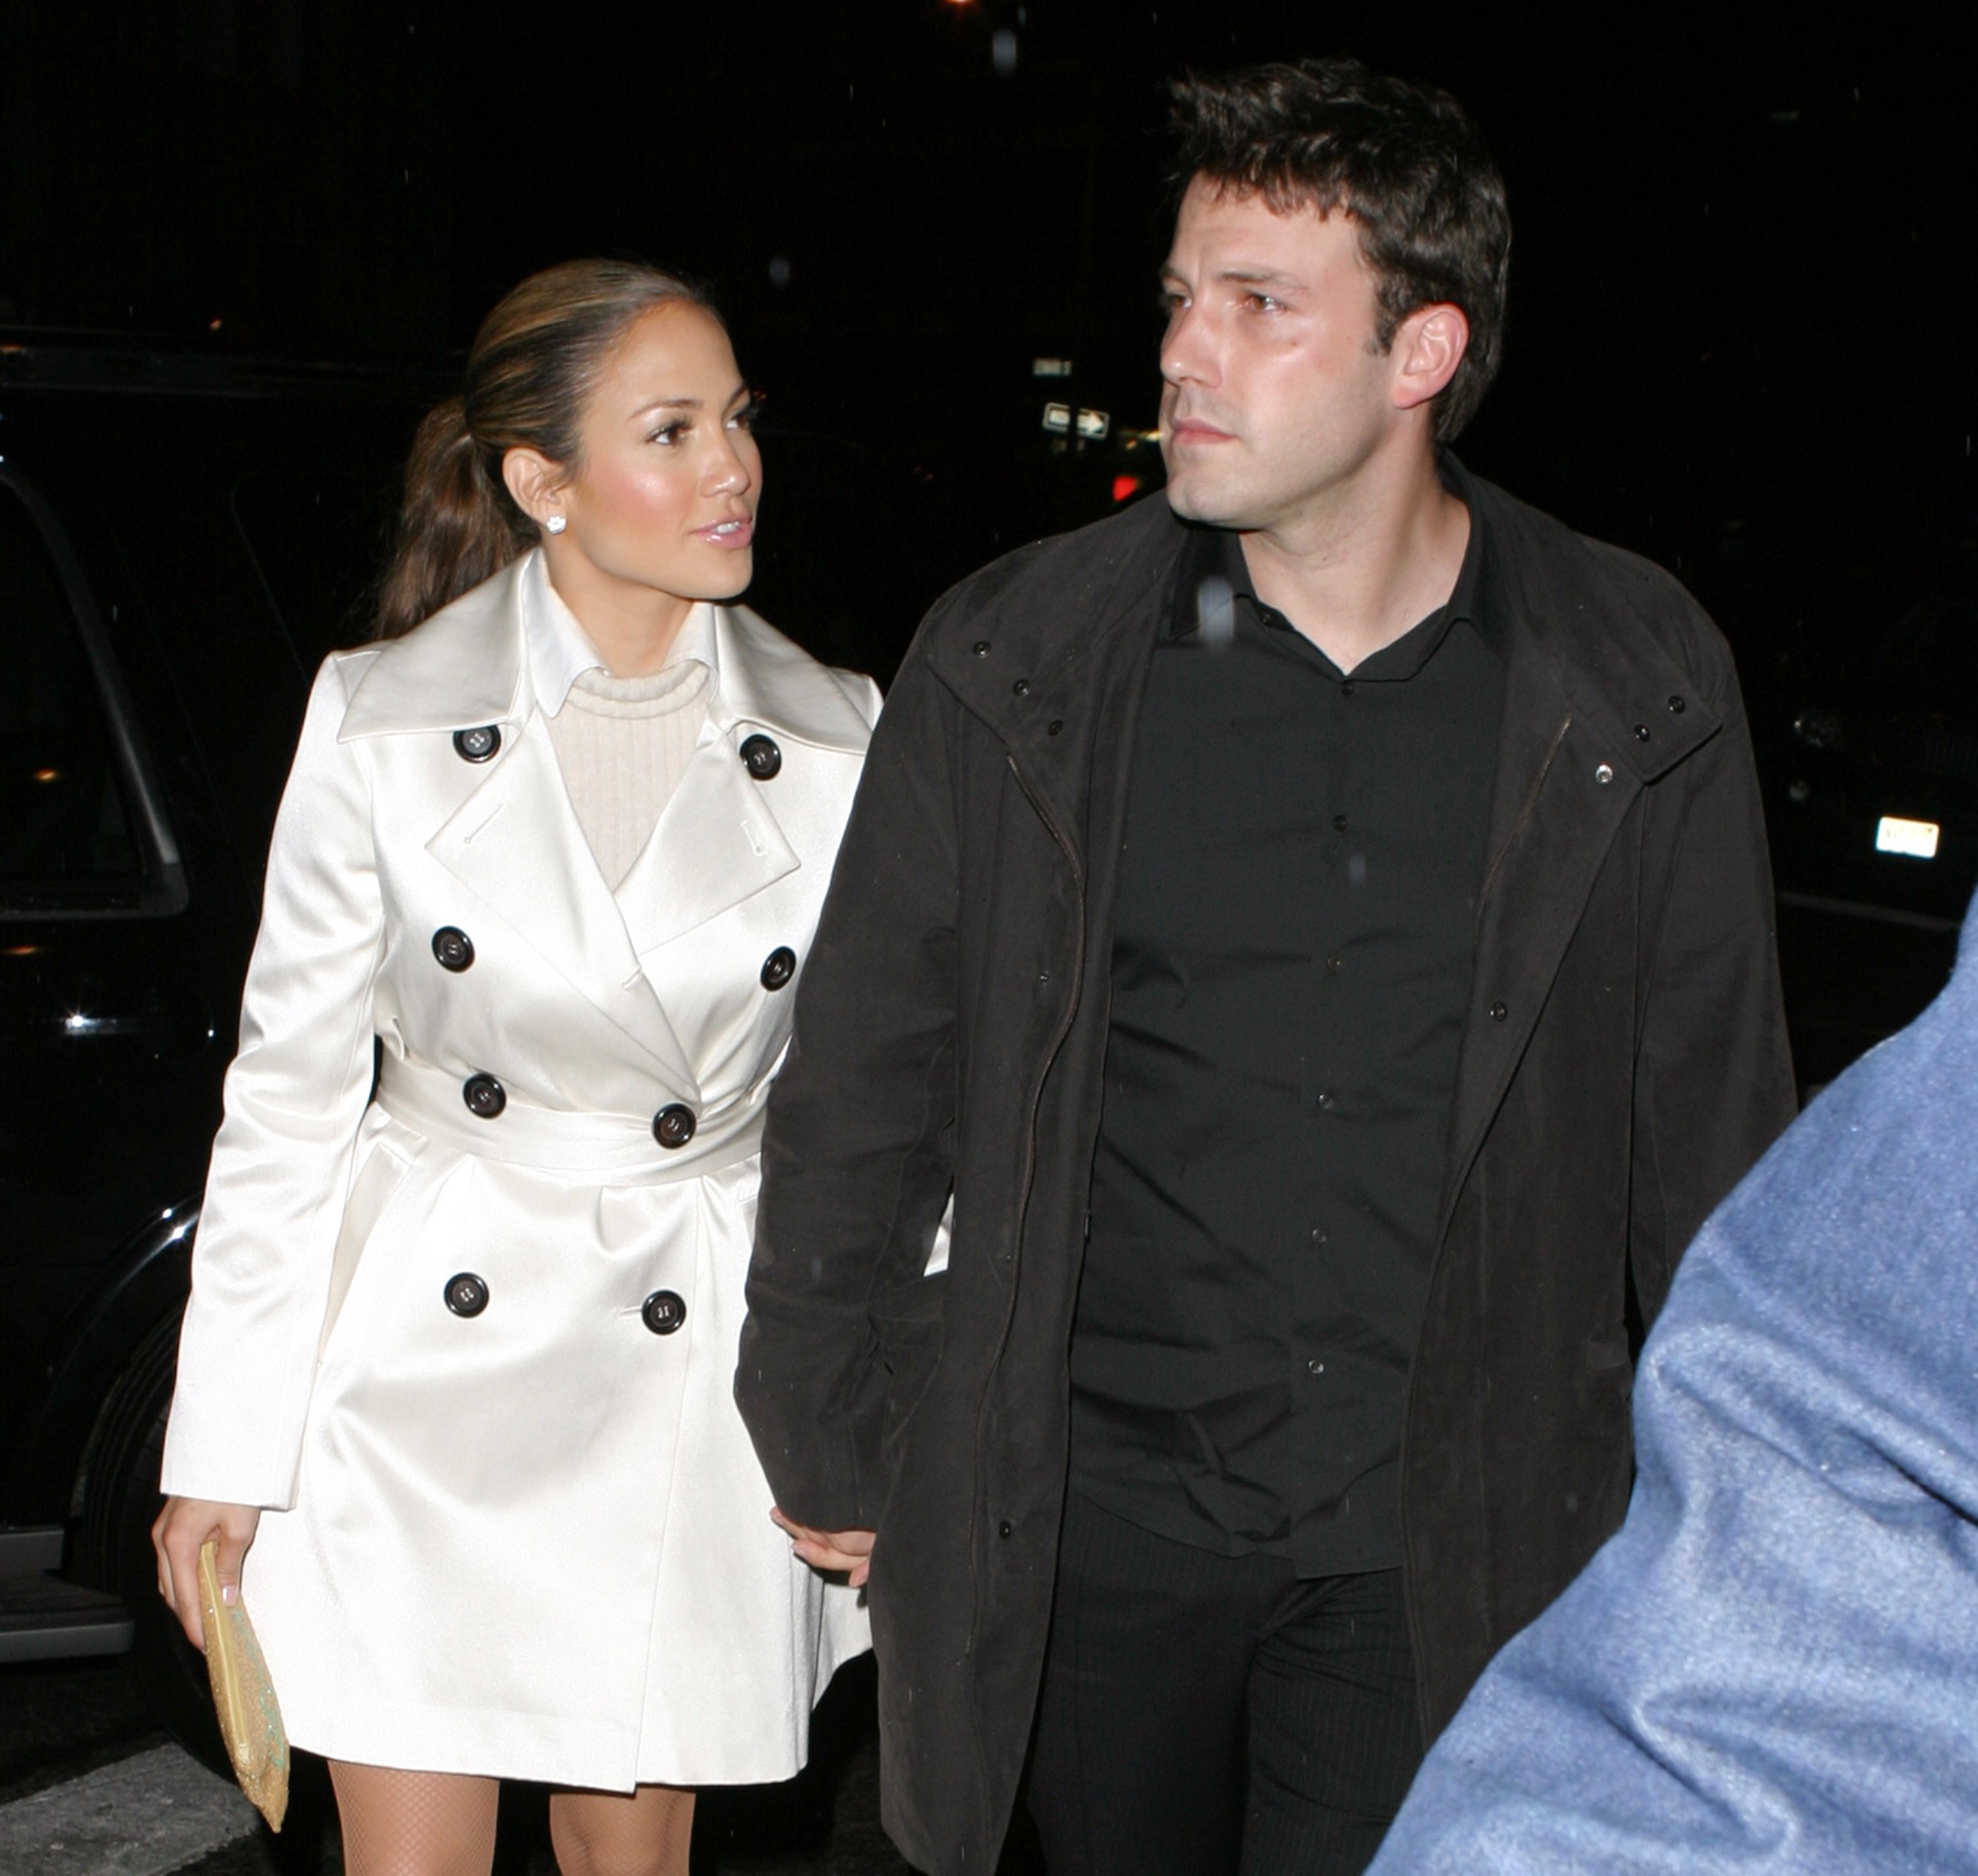 An undated image of Jennifer Lopez and Ben Affleck | Photo: Getty Images